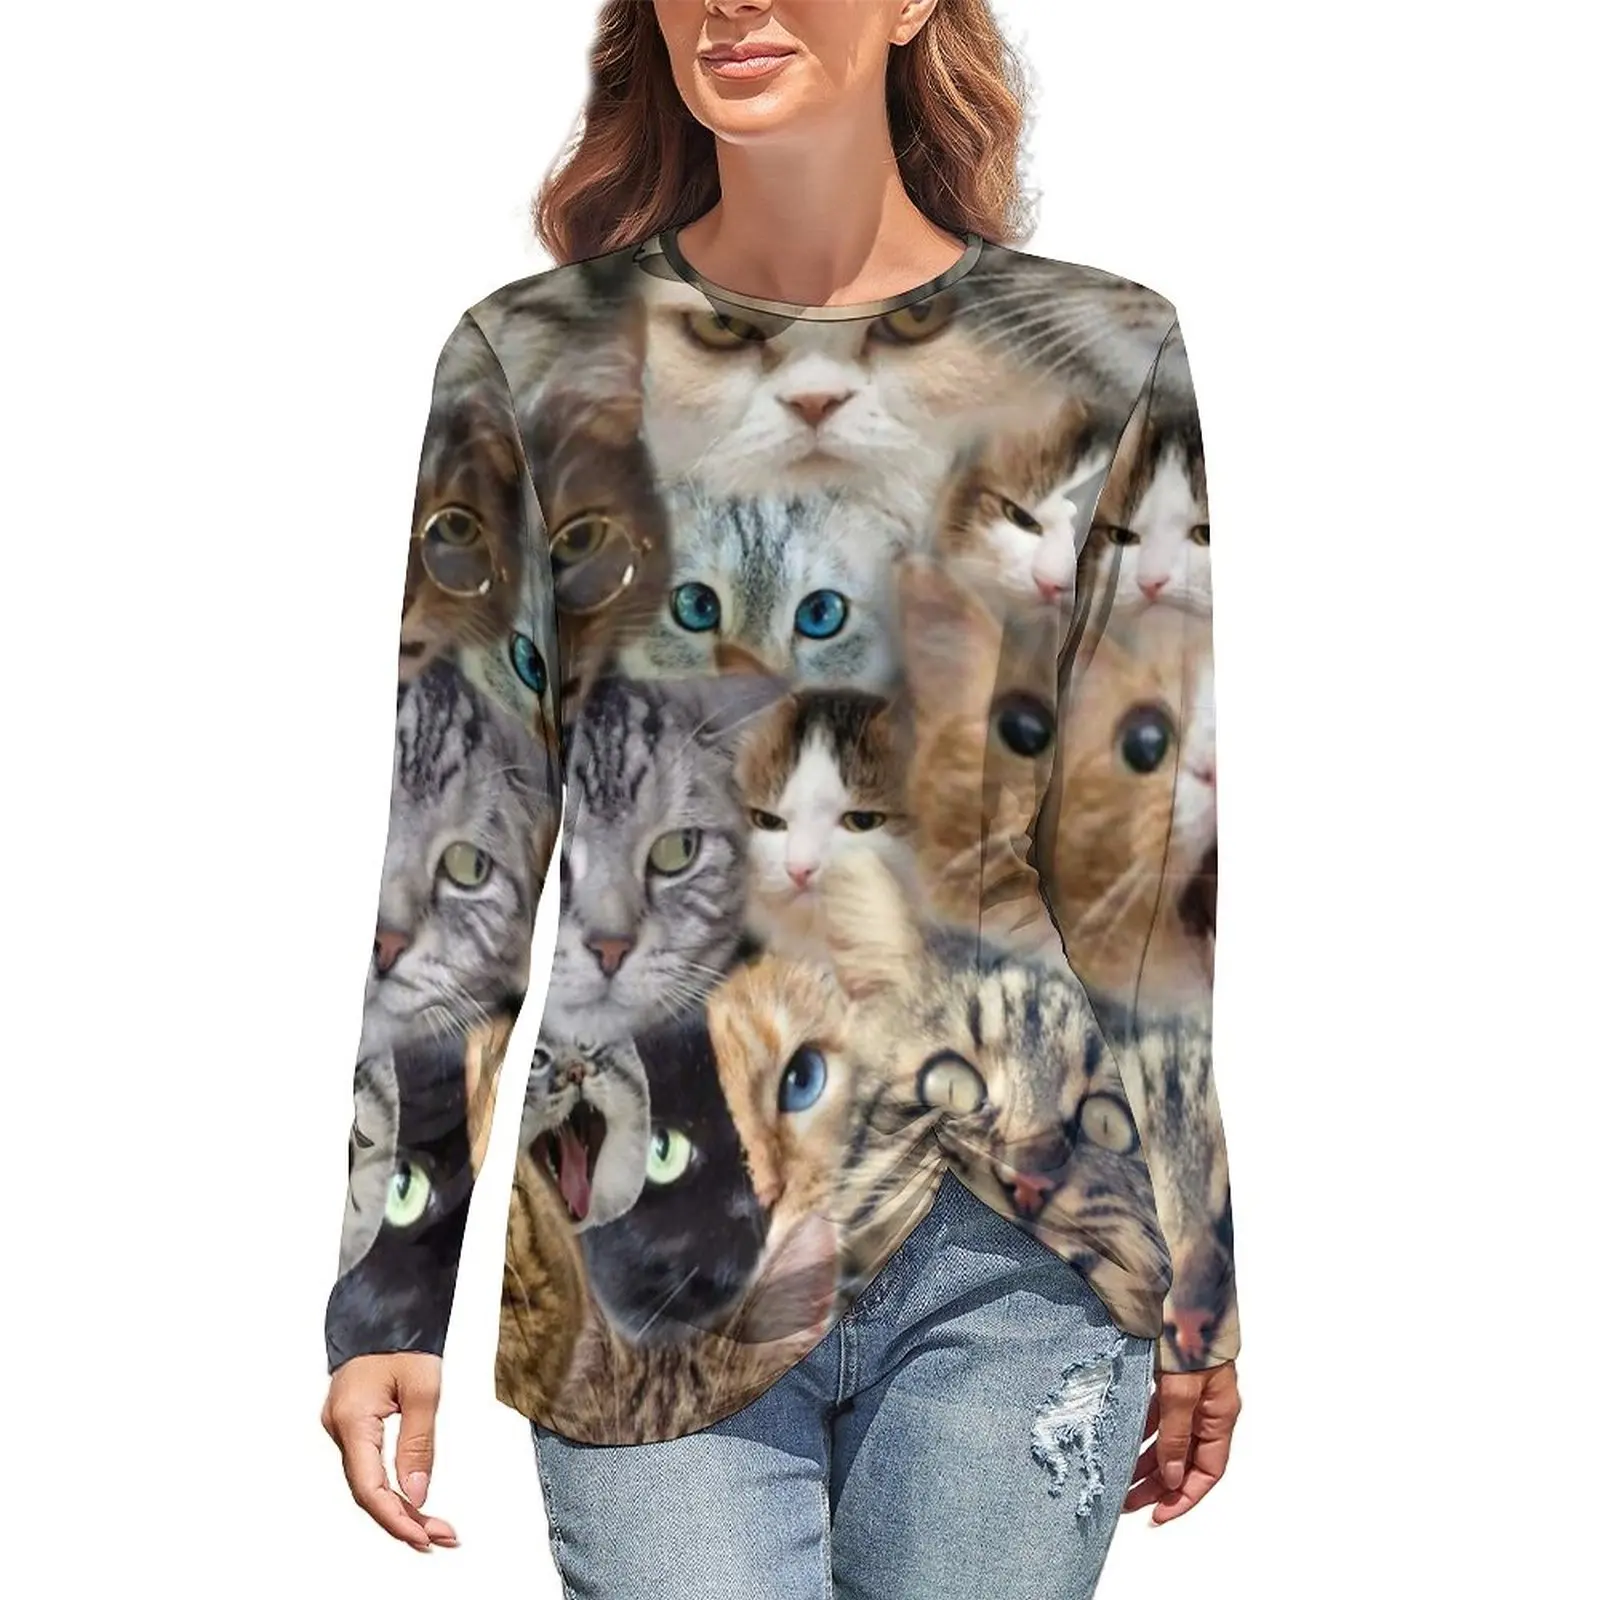 

Cute Cat Collage T-Shirts Many Faces Of Cats Animal Print Aesthetic T-Shirt Long Sleeve Street Fashion Tops Oversize Top Tees